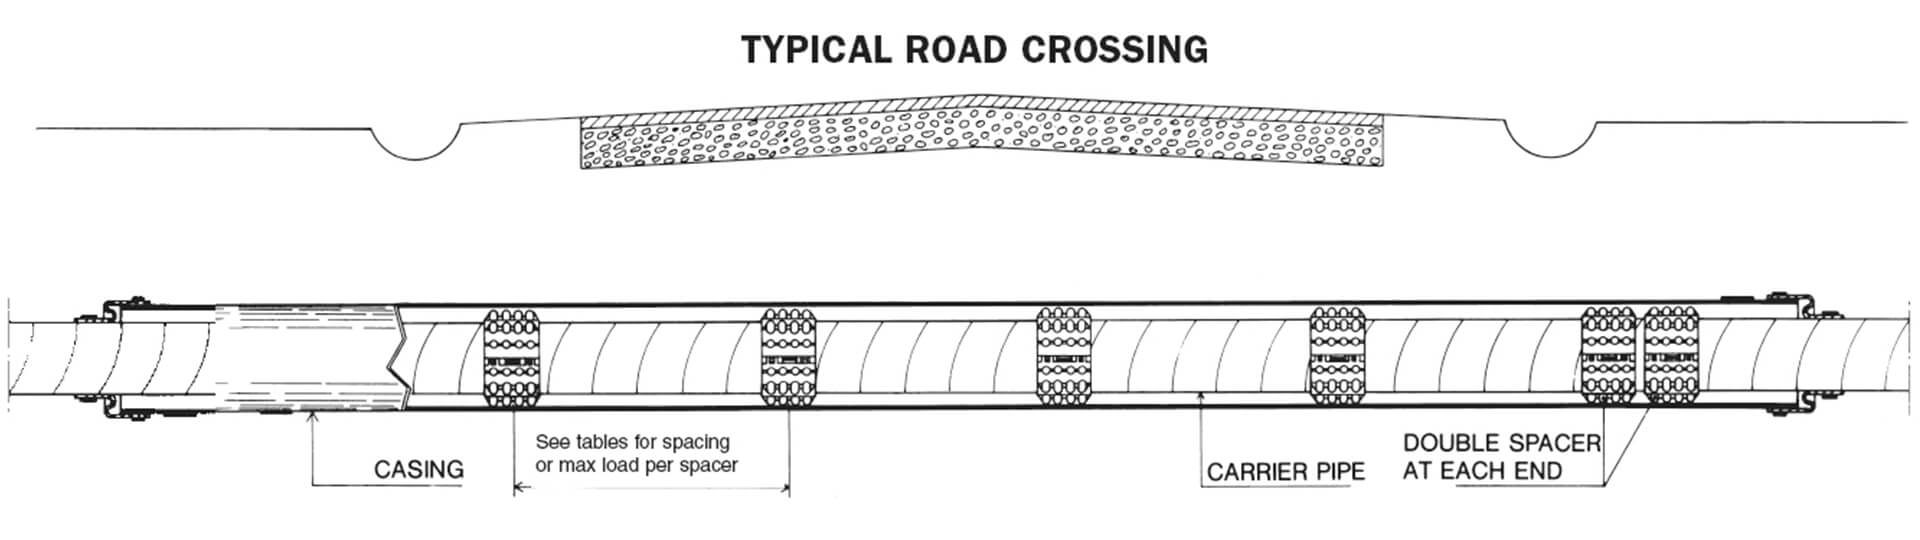 schematic road crossing with pipe spacers